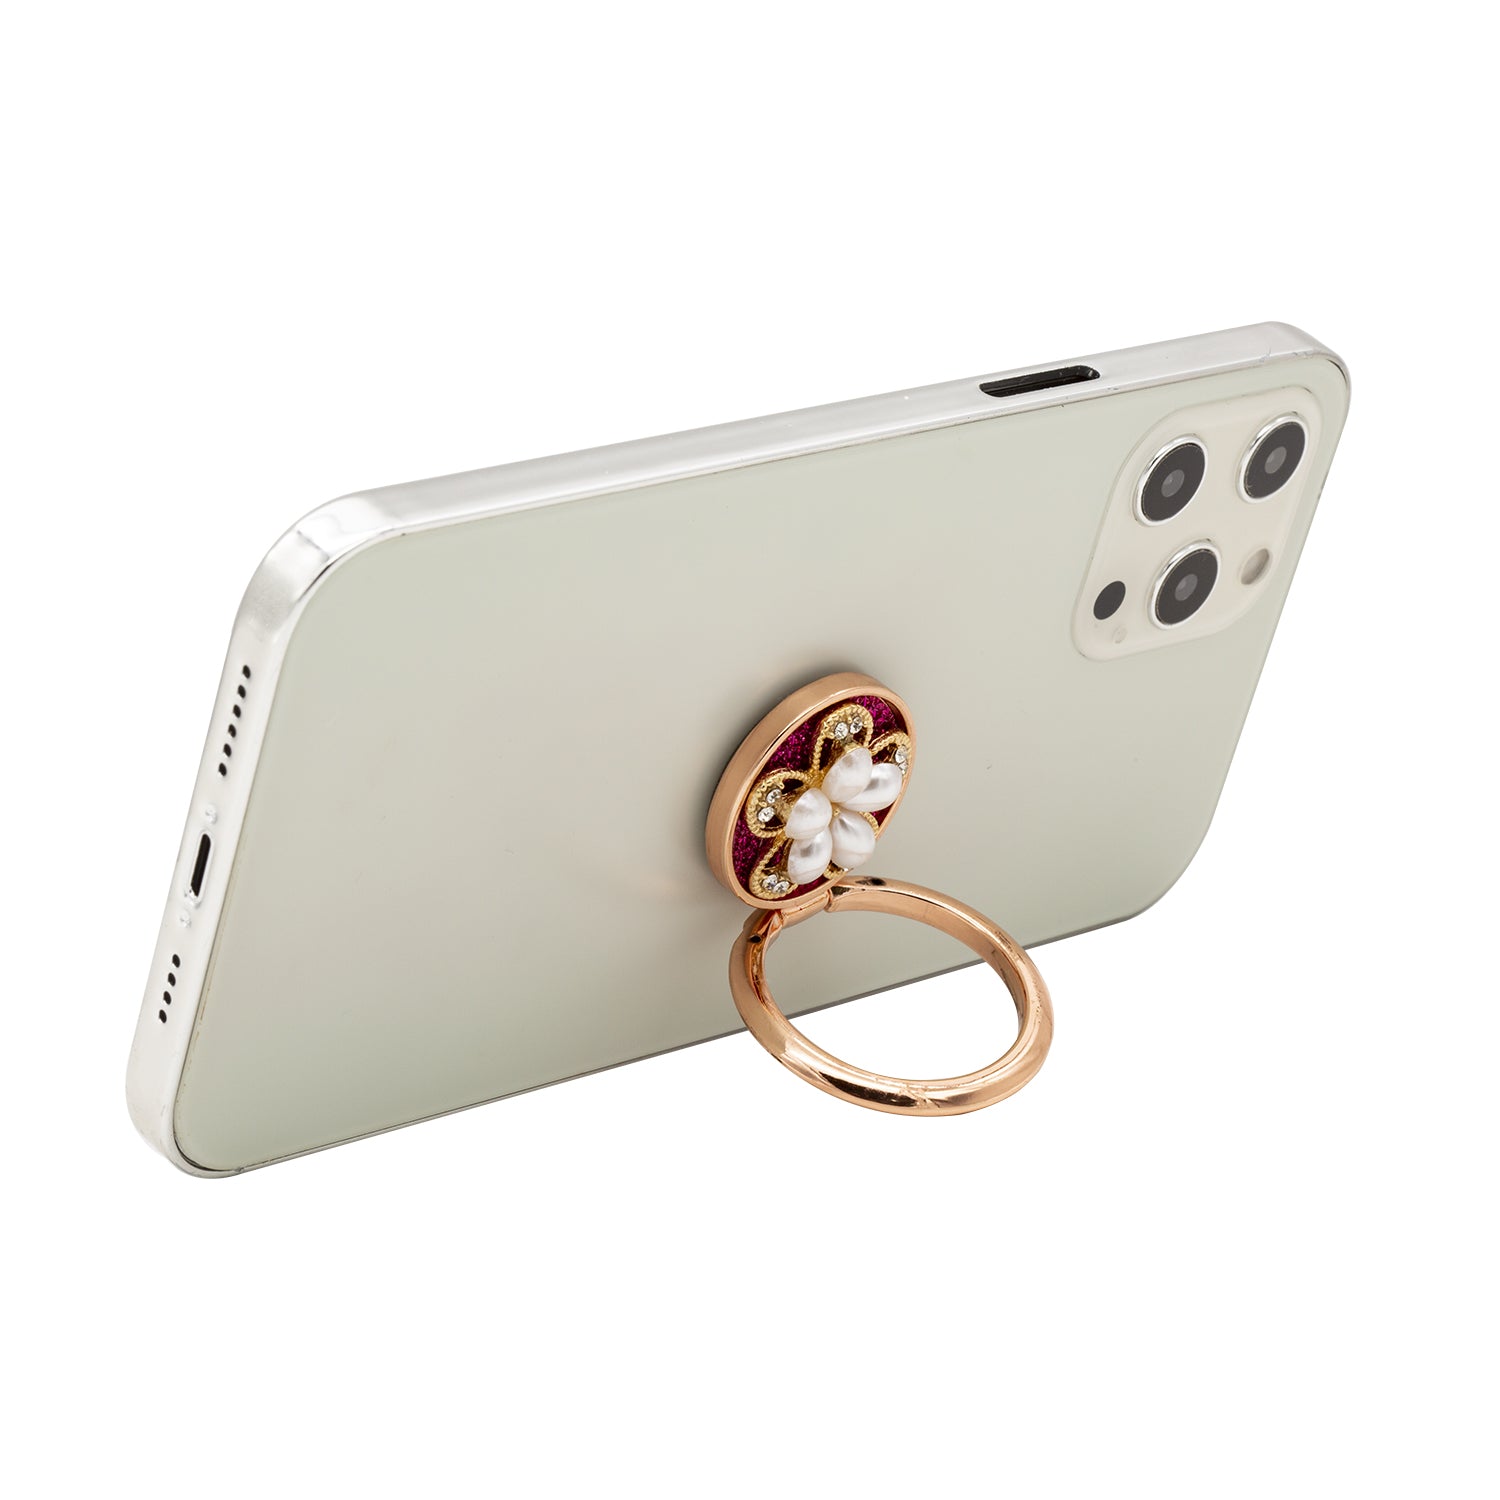 Bling bling pearl and diamonds mobile phone metal ring buckle / kickstand